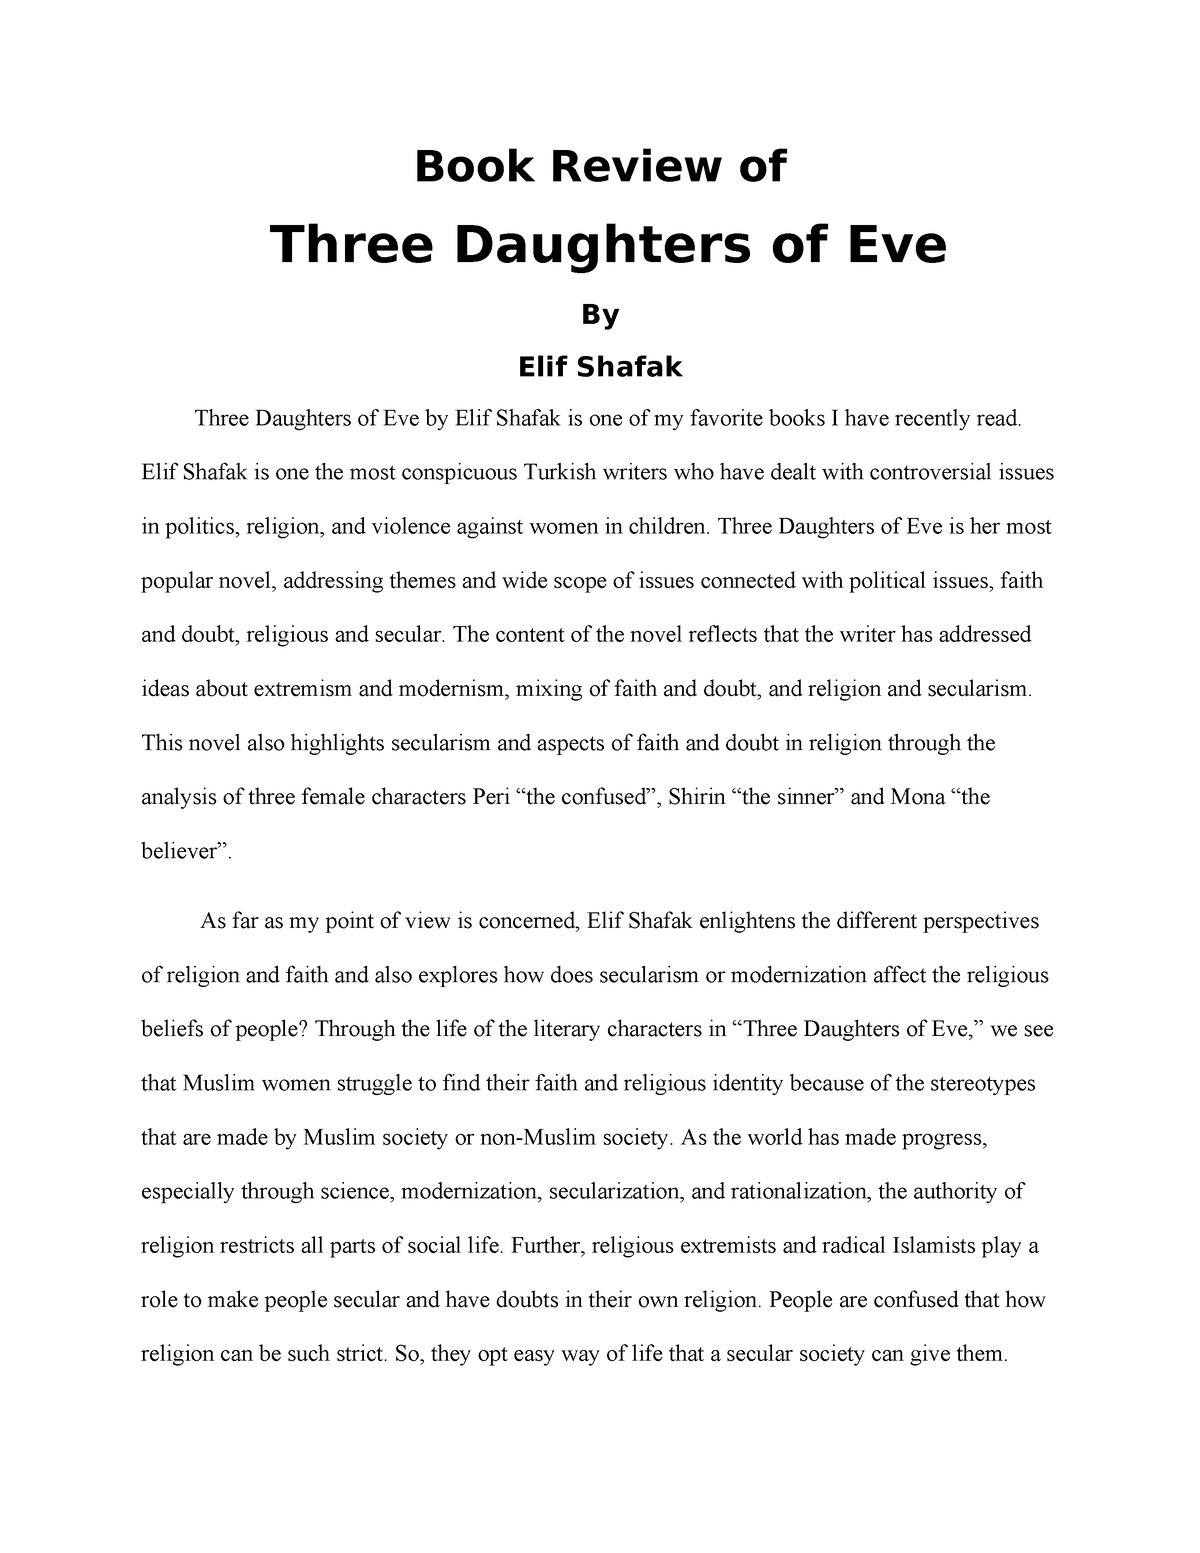 Review Of Three Daughters Of Eve By Elif Shafak Book Review Of Three Daughters Of Eve By